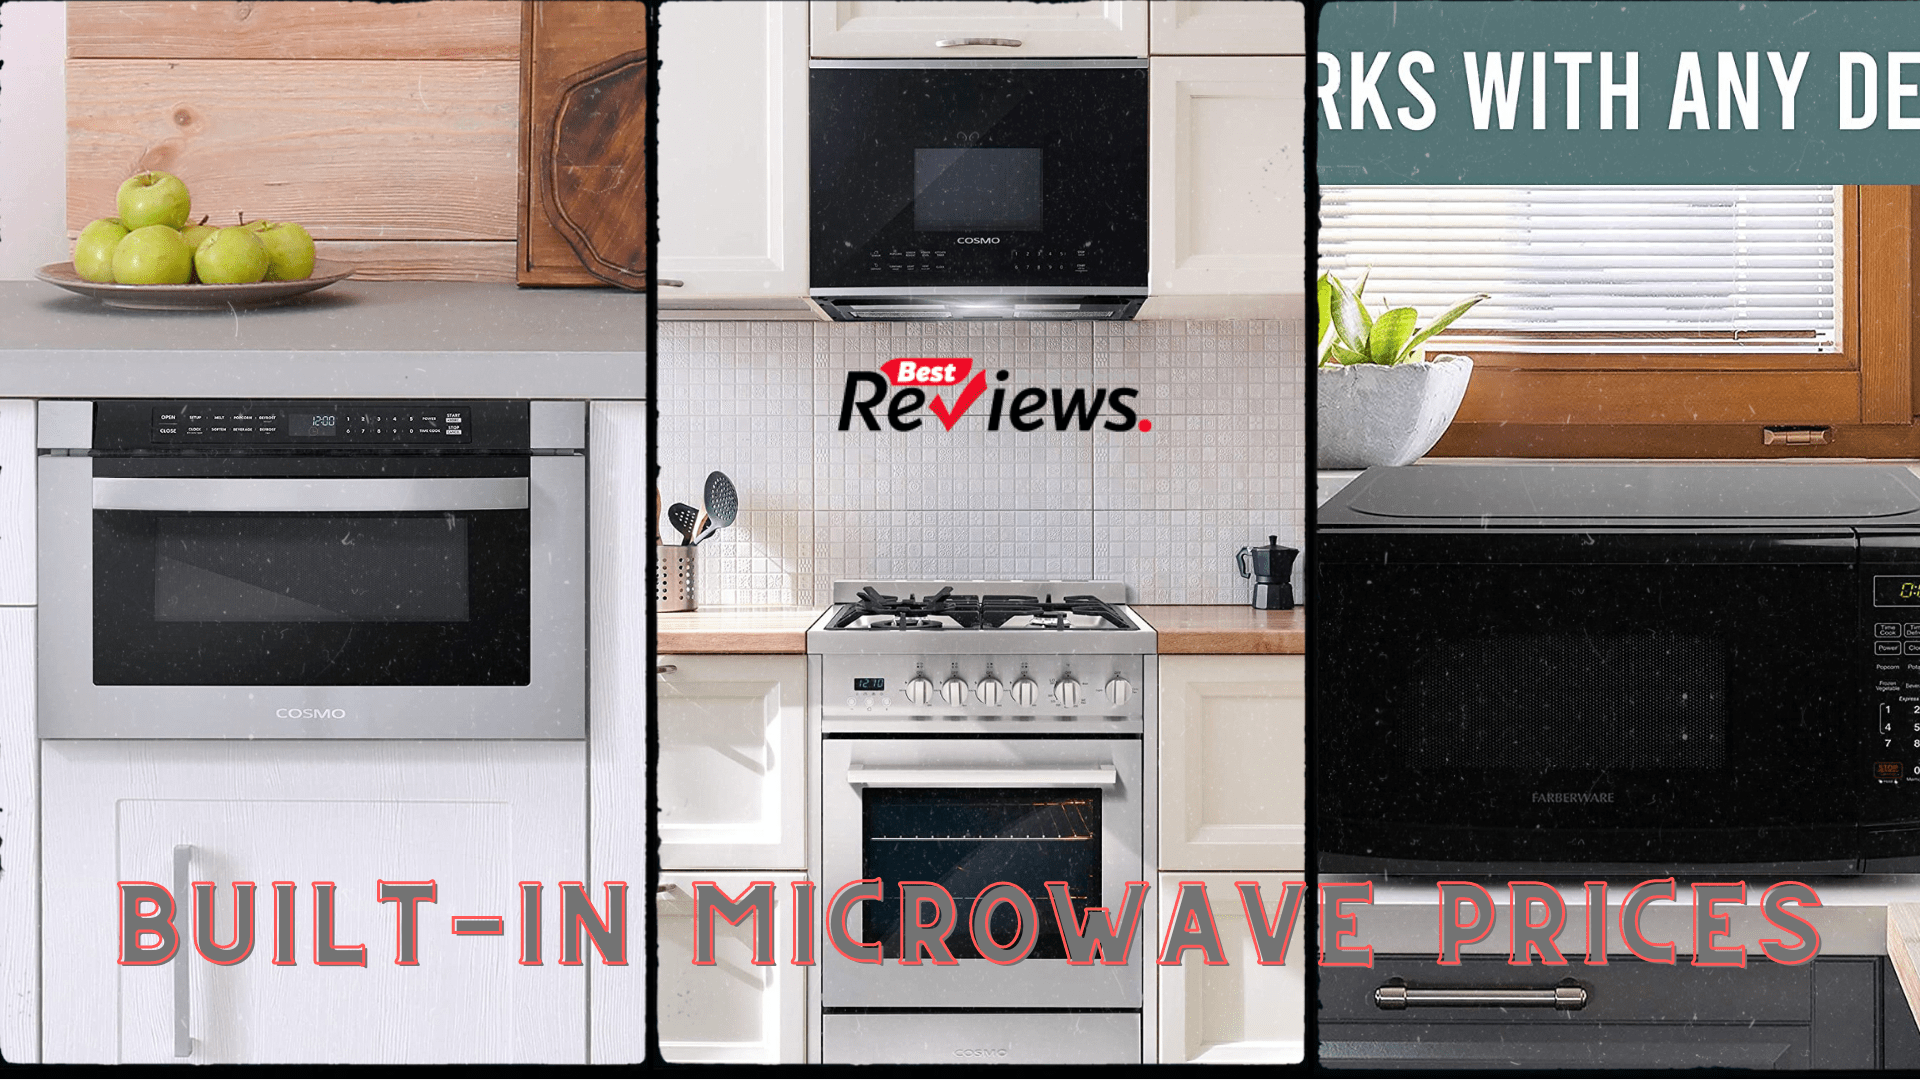 BUILT-IN MICROWAVE PRICES